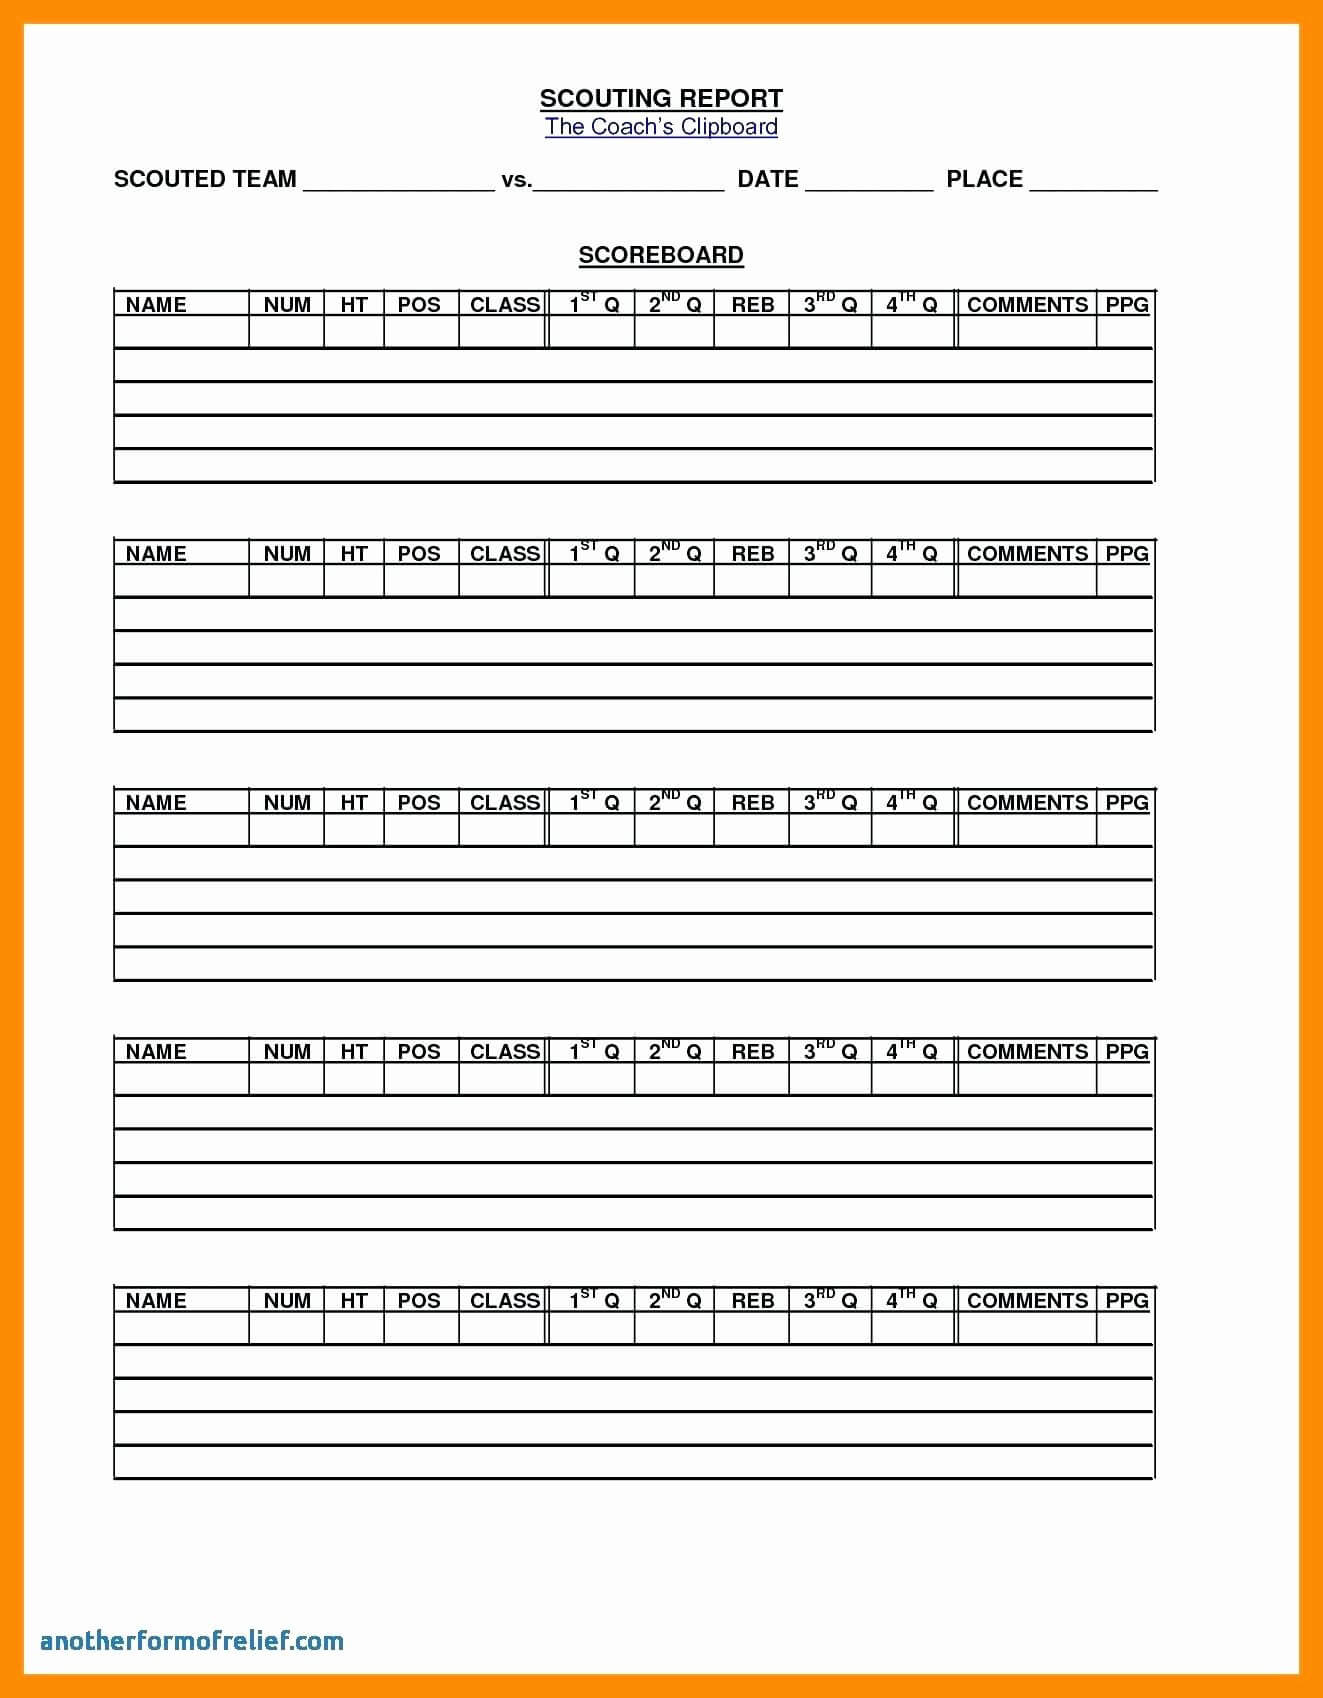 2E6D Basketball Scouting Report Template Sheets Intended For Scouting Report Basketball Template